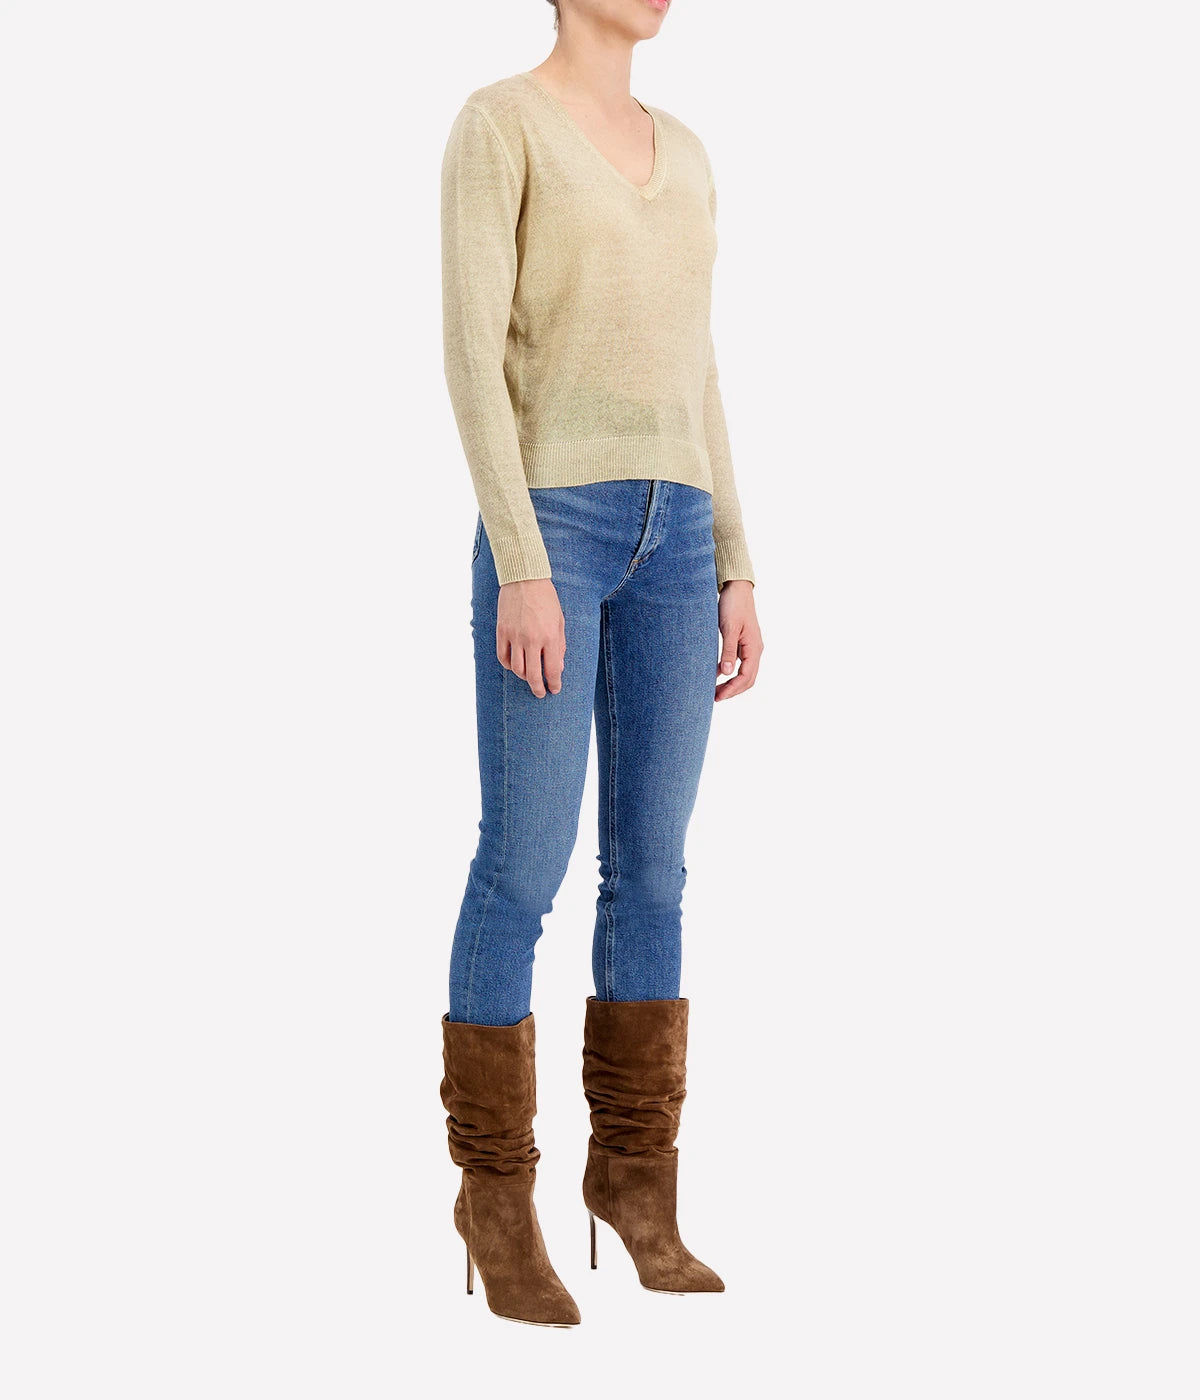 Light Cashmere Fitted V Neck Pullover in Zenzero